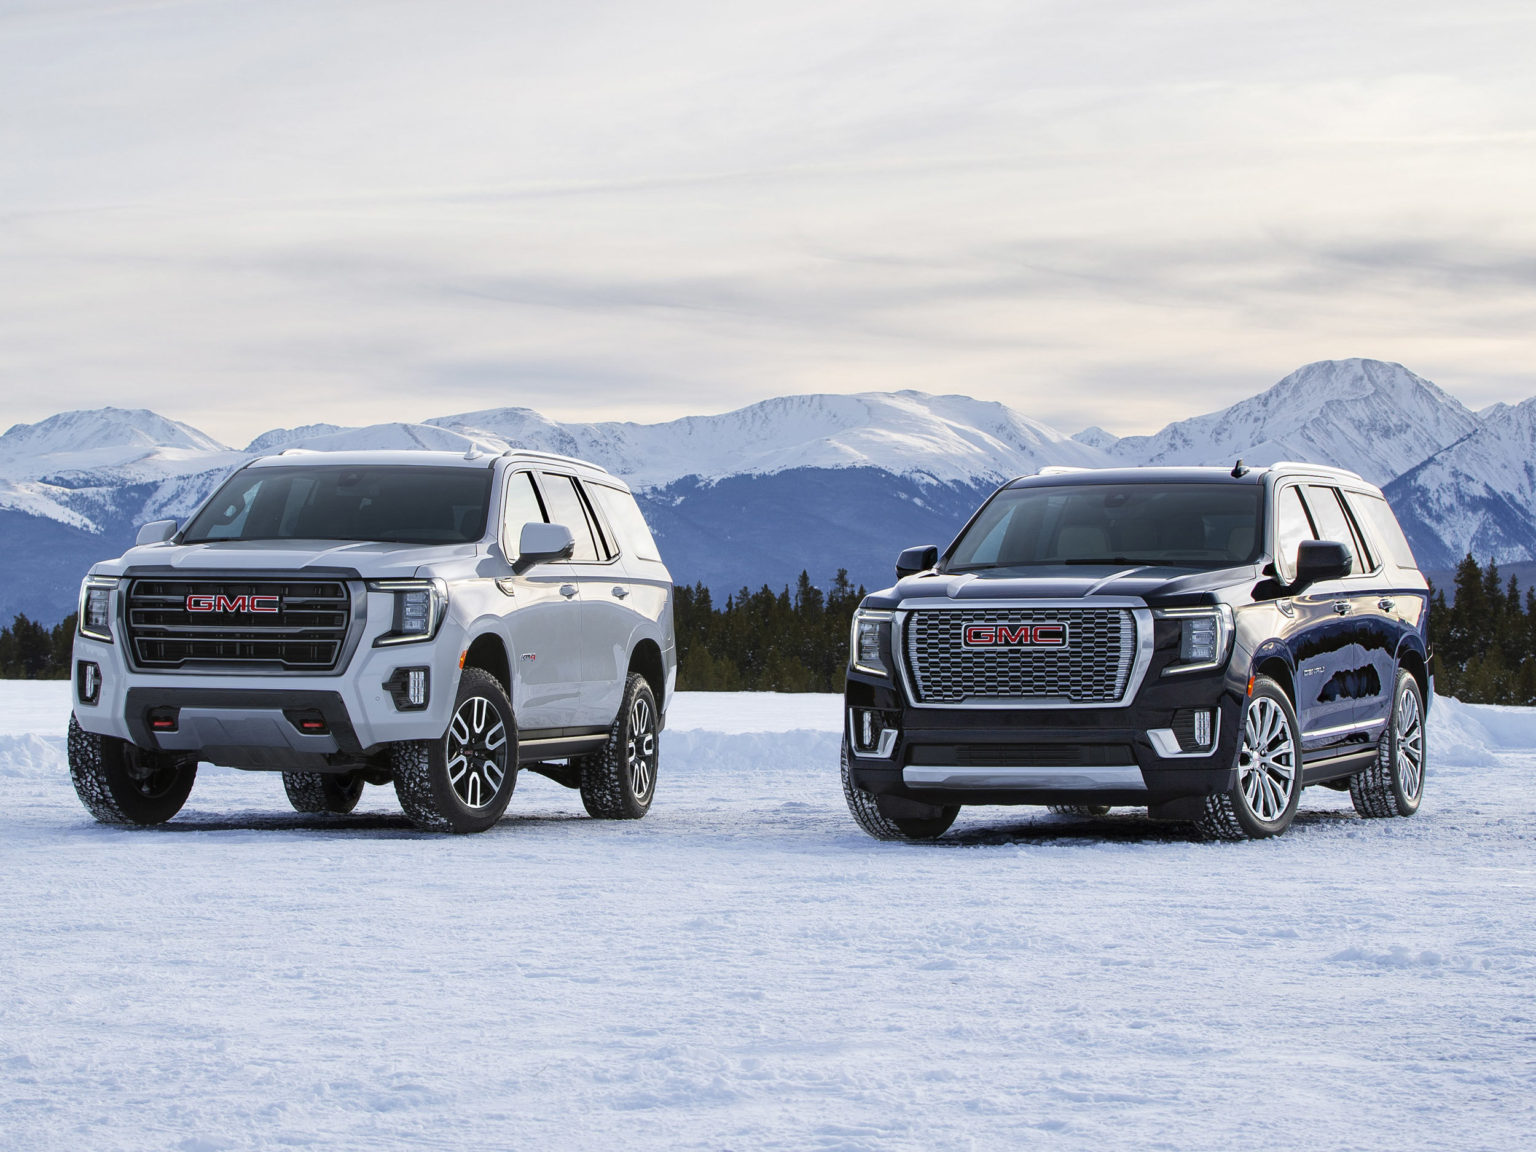 GMC has revealed the AT4 and Denali versions of their popular three-row SUV.